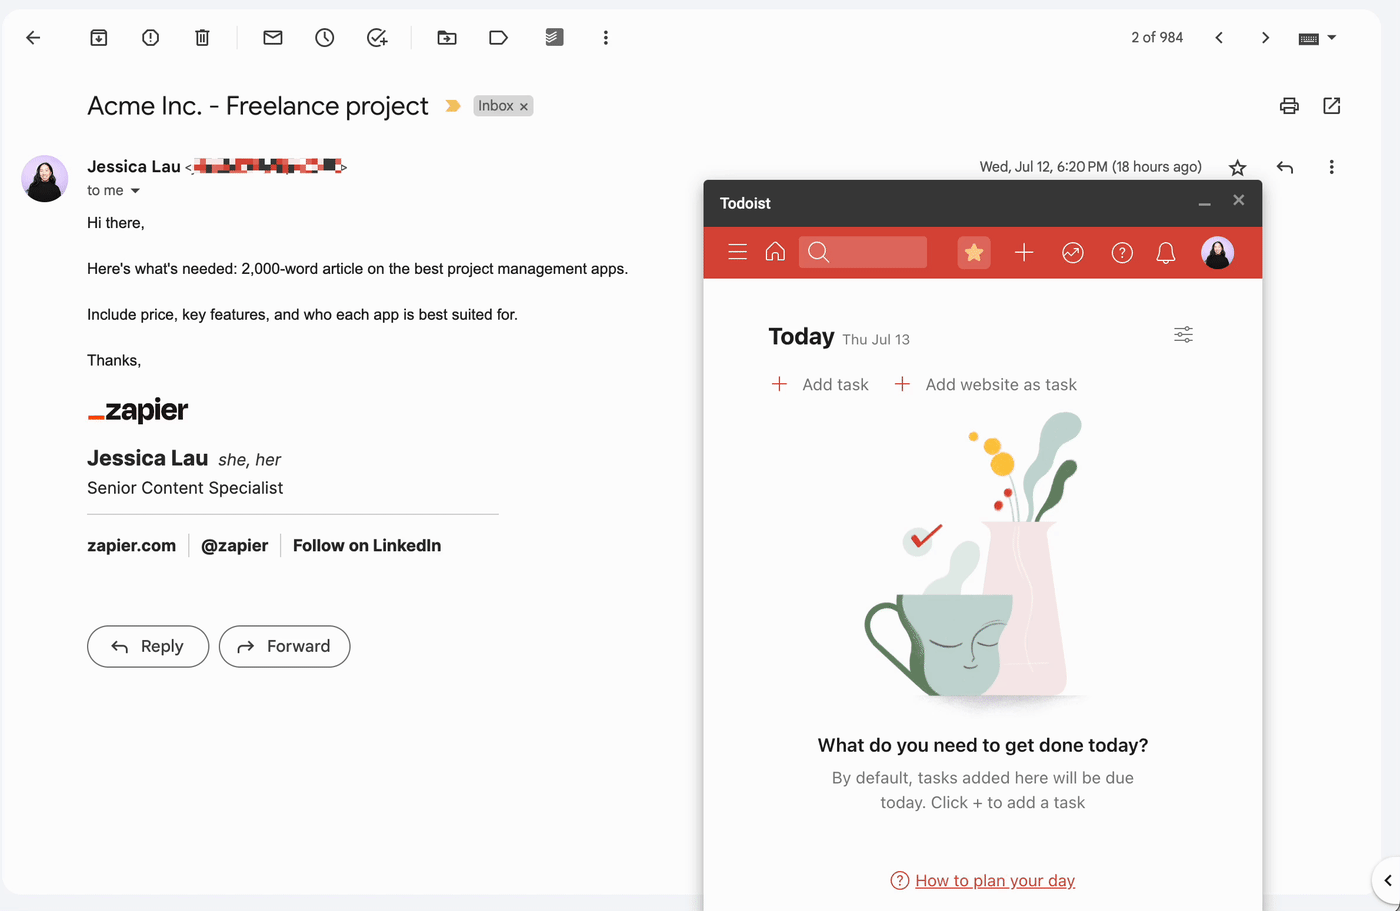 Expanded Todoist extension window in a Gmail email. The cursor clicks "Add website as task," and the email is automatically converted into a Todoist task.